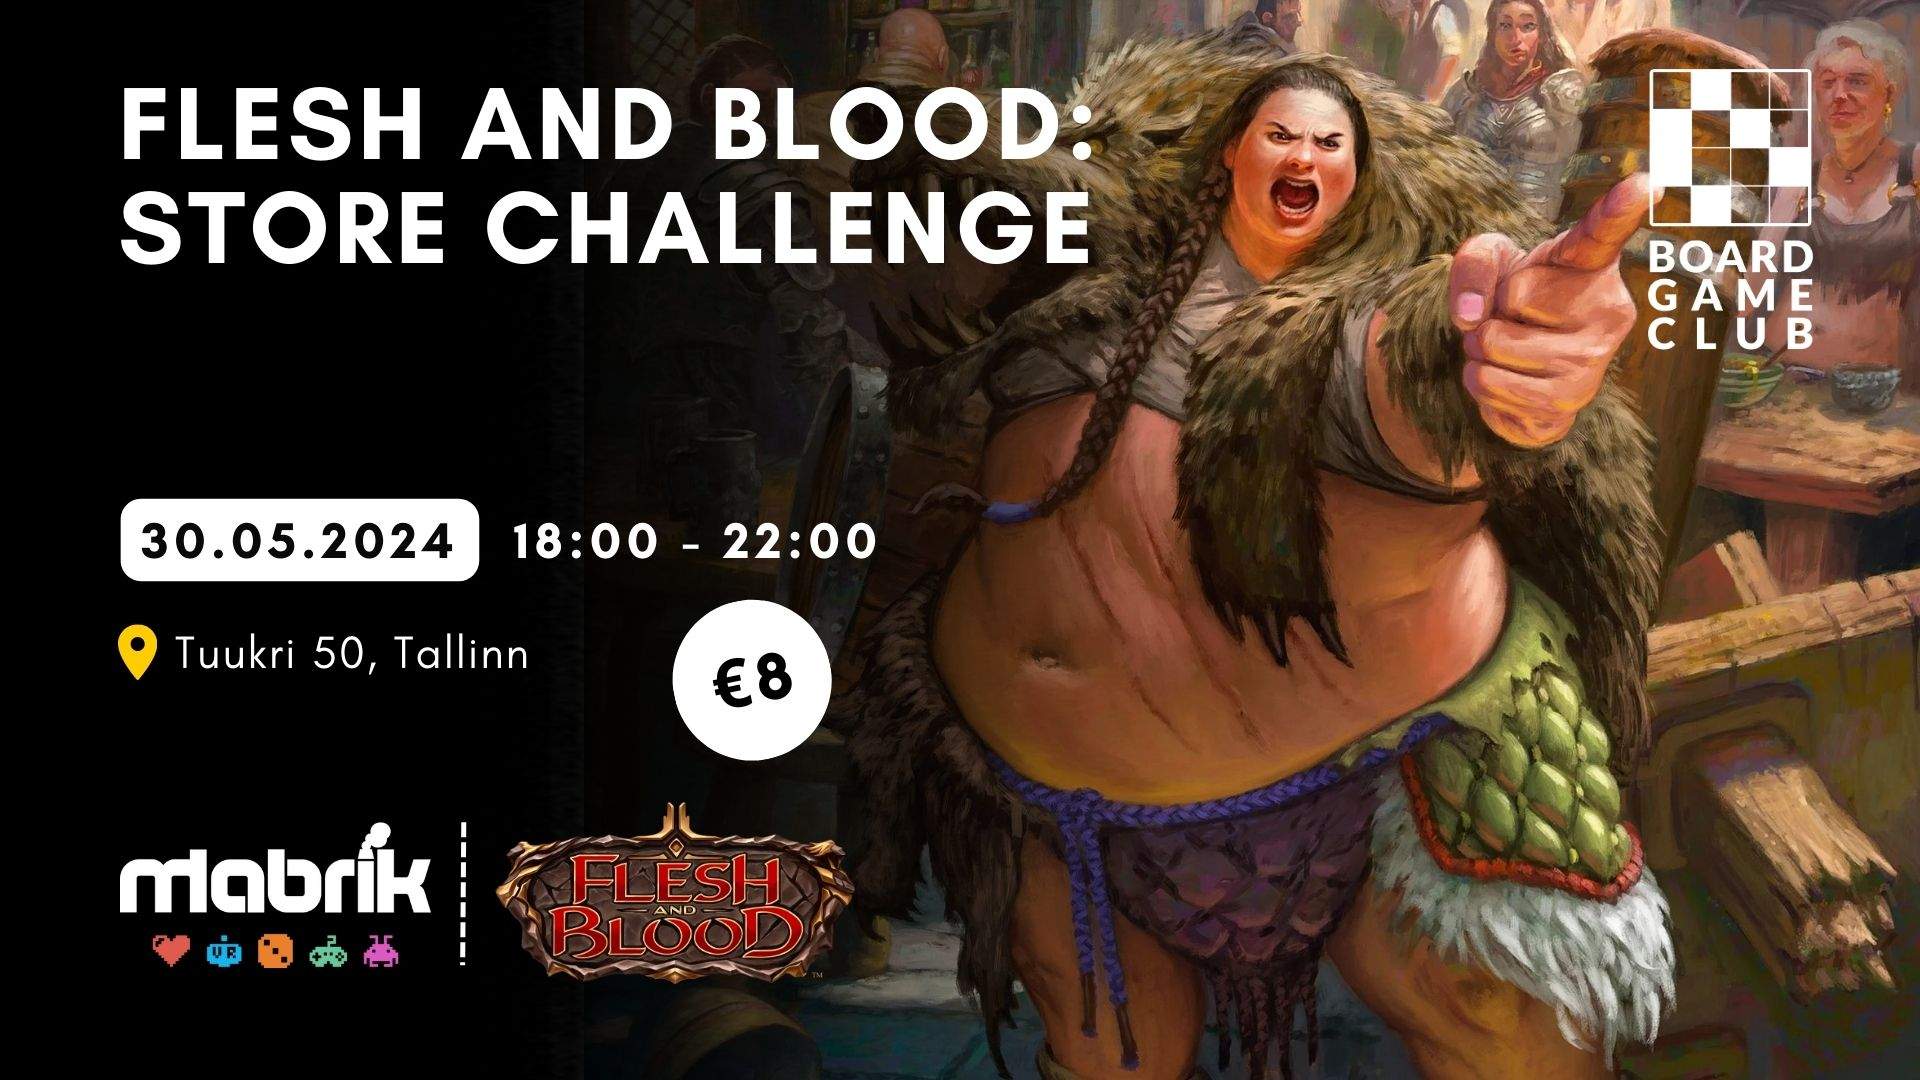 Events - 30.05.2024 - Flesh and Blood - Store Challenge